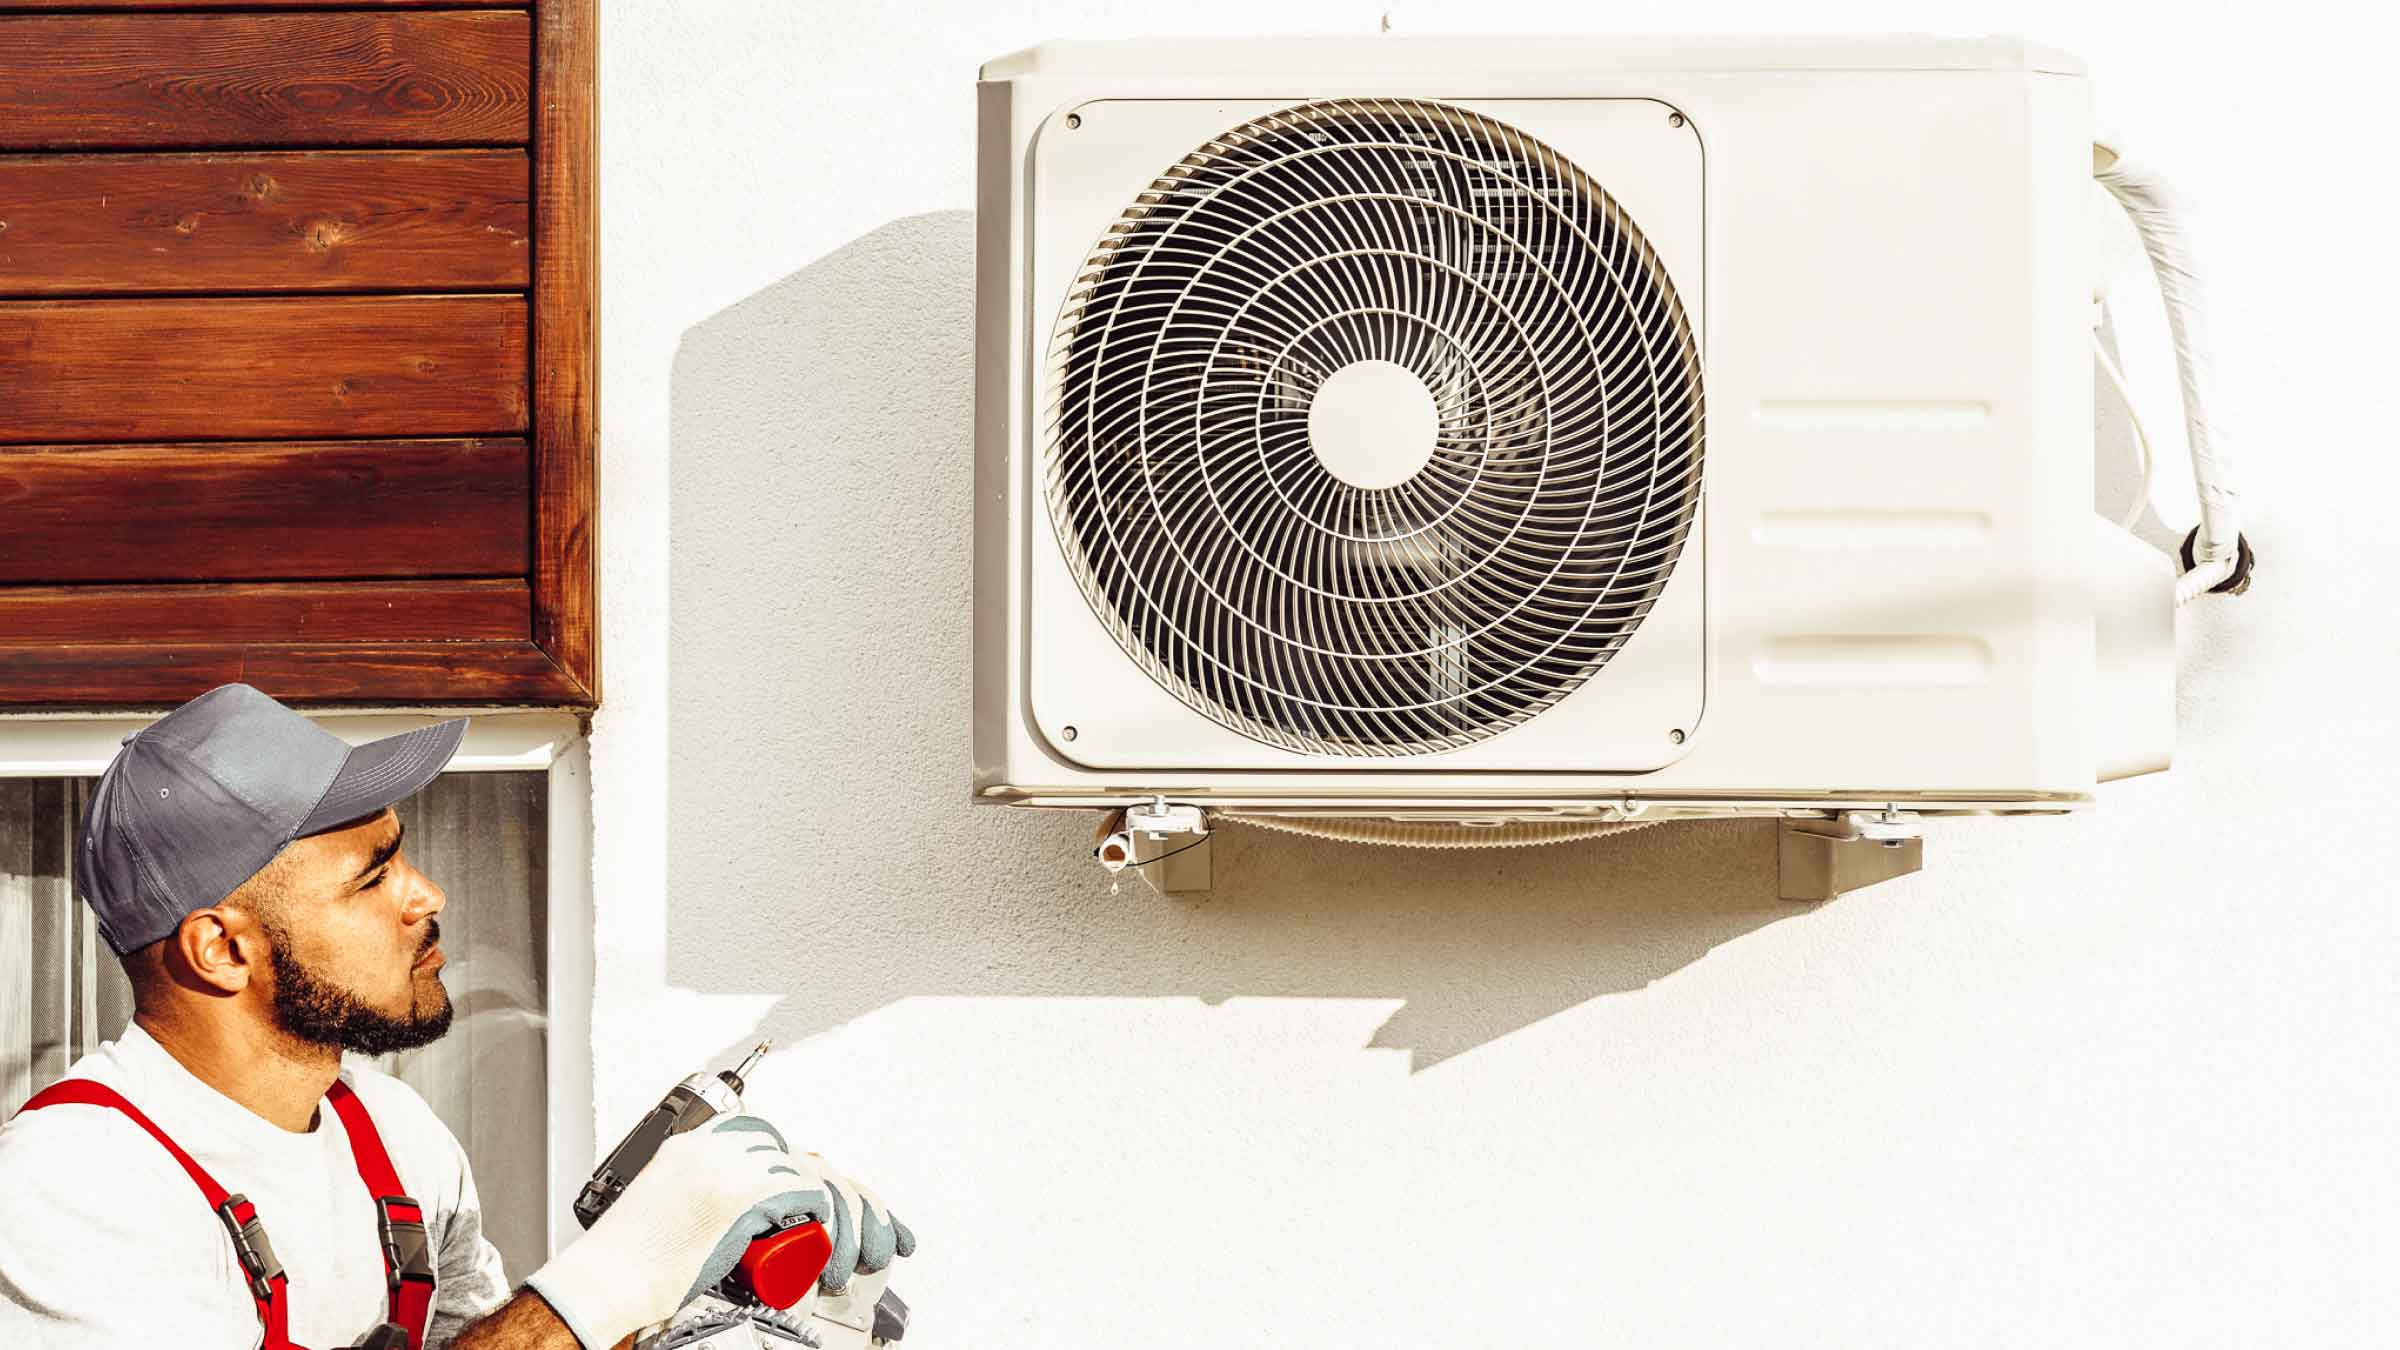 Air conditioner mounted to the outside wall of a home, man stands to the left with drill in hand.